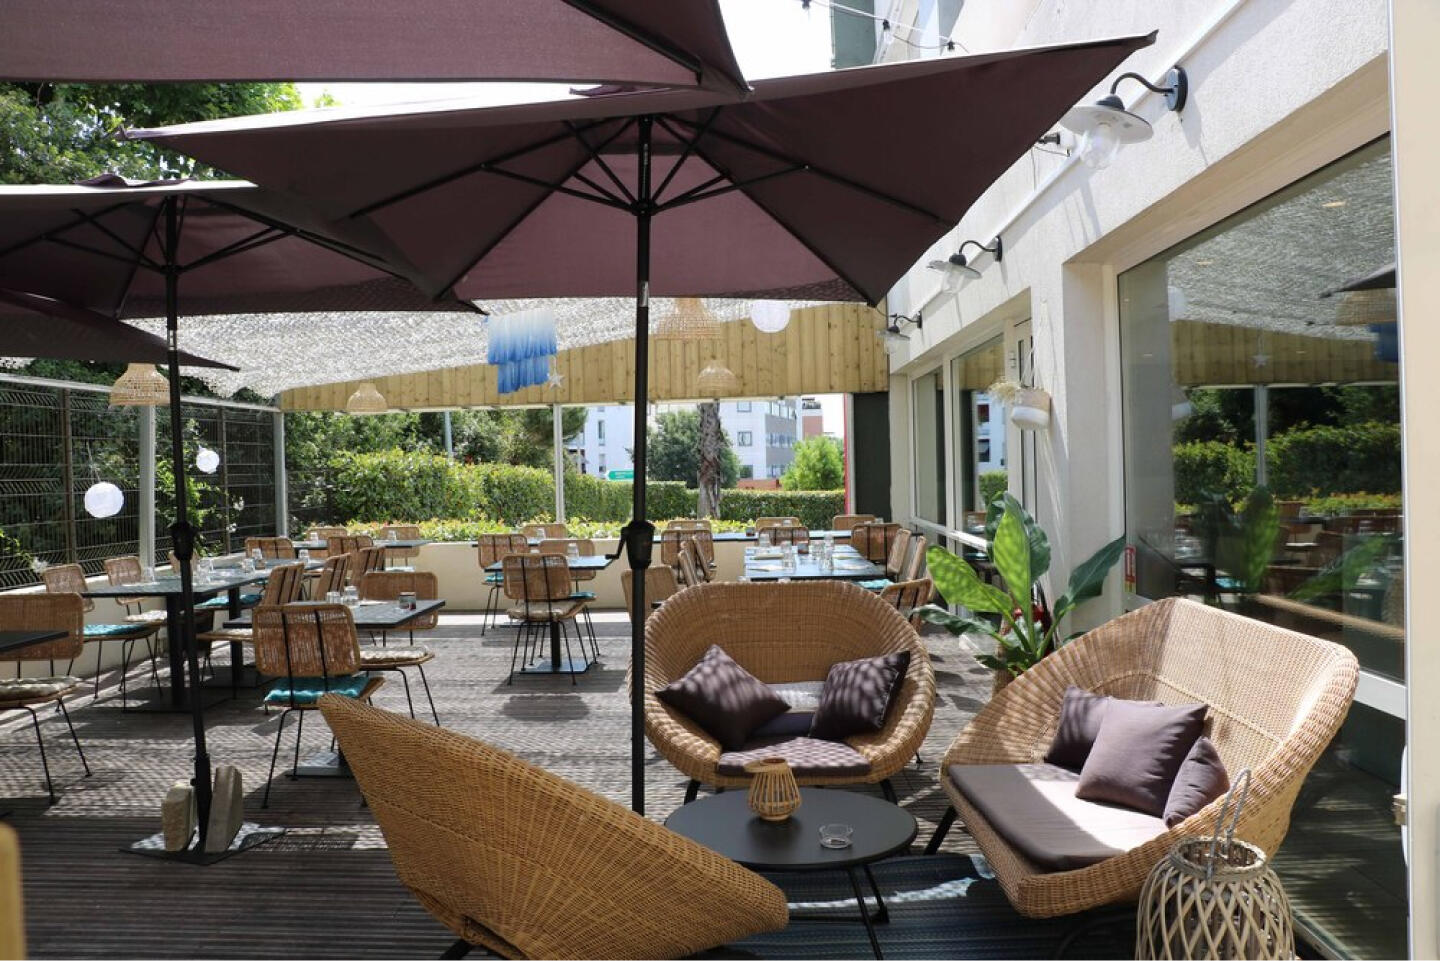 Outdoor terrace of Restaurant Bistrot City Montpellier Ovalie featuring comfortable wicker armchairs under a large brown umbrella, tables set for dining, and green plants, providing a relaxed setting for al fresco dining.